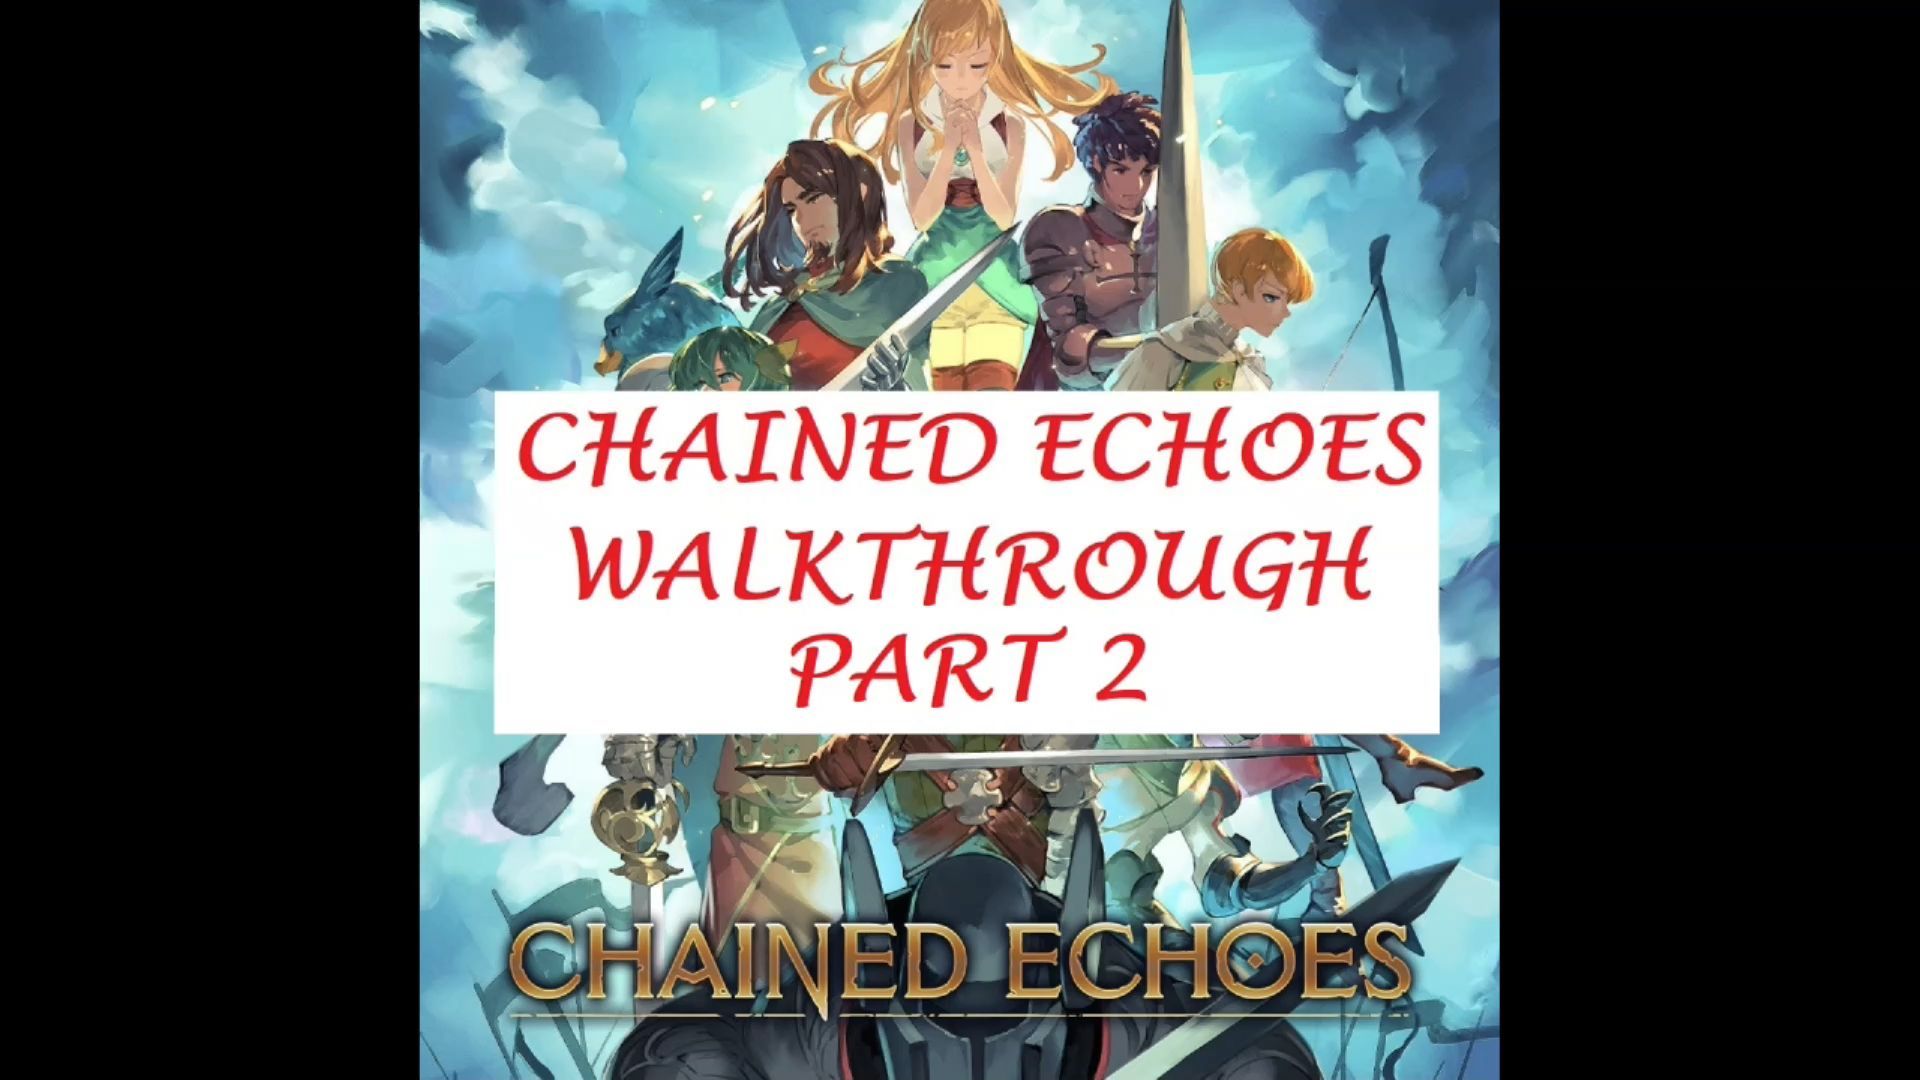 Chained Echoes Full Game Walkthrough - Part 2 